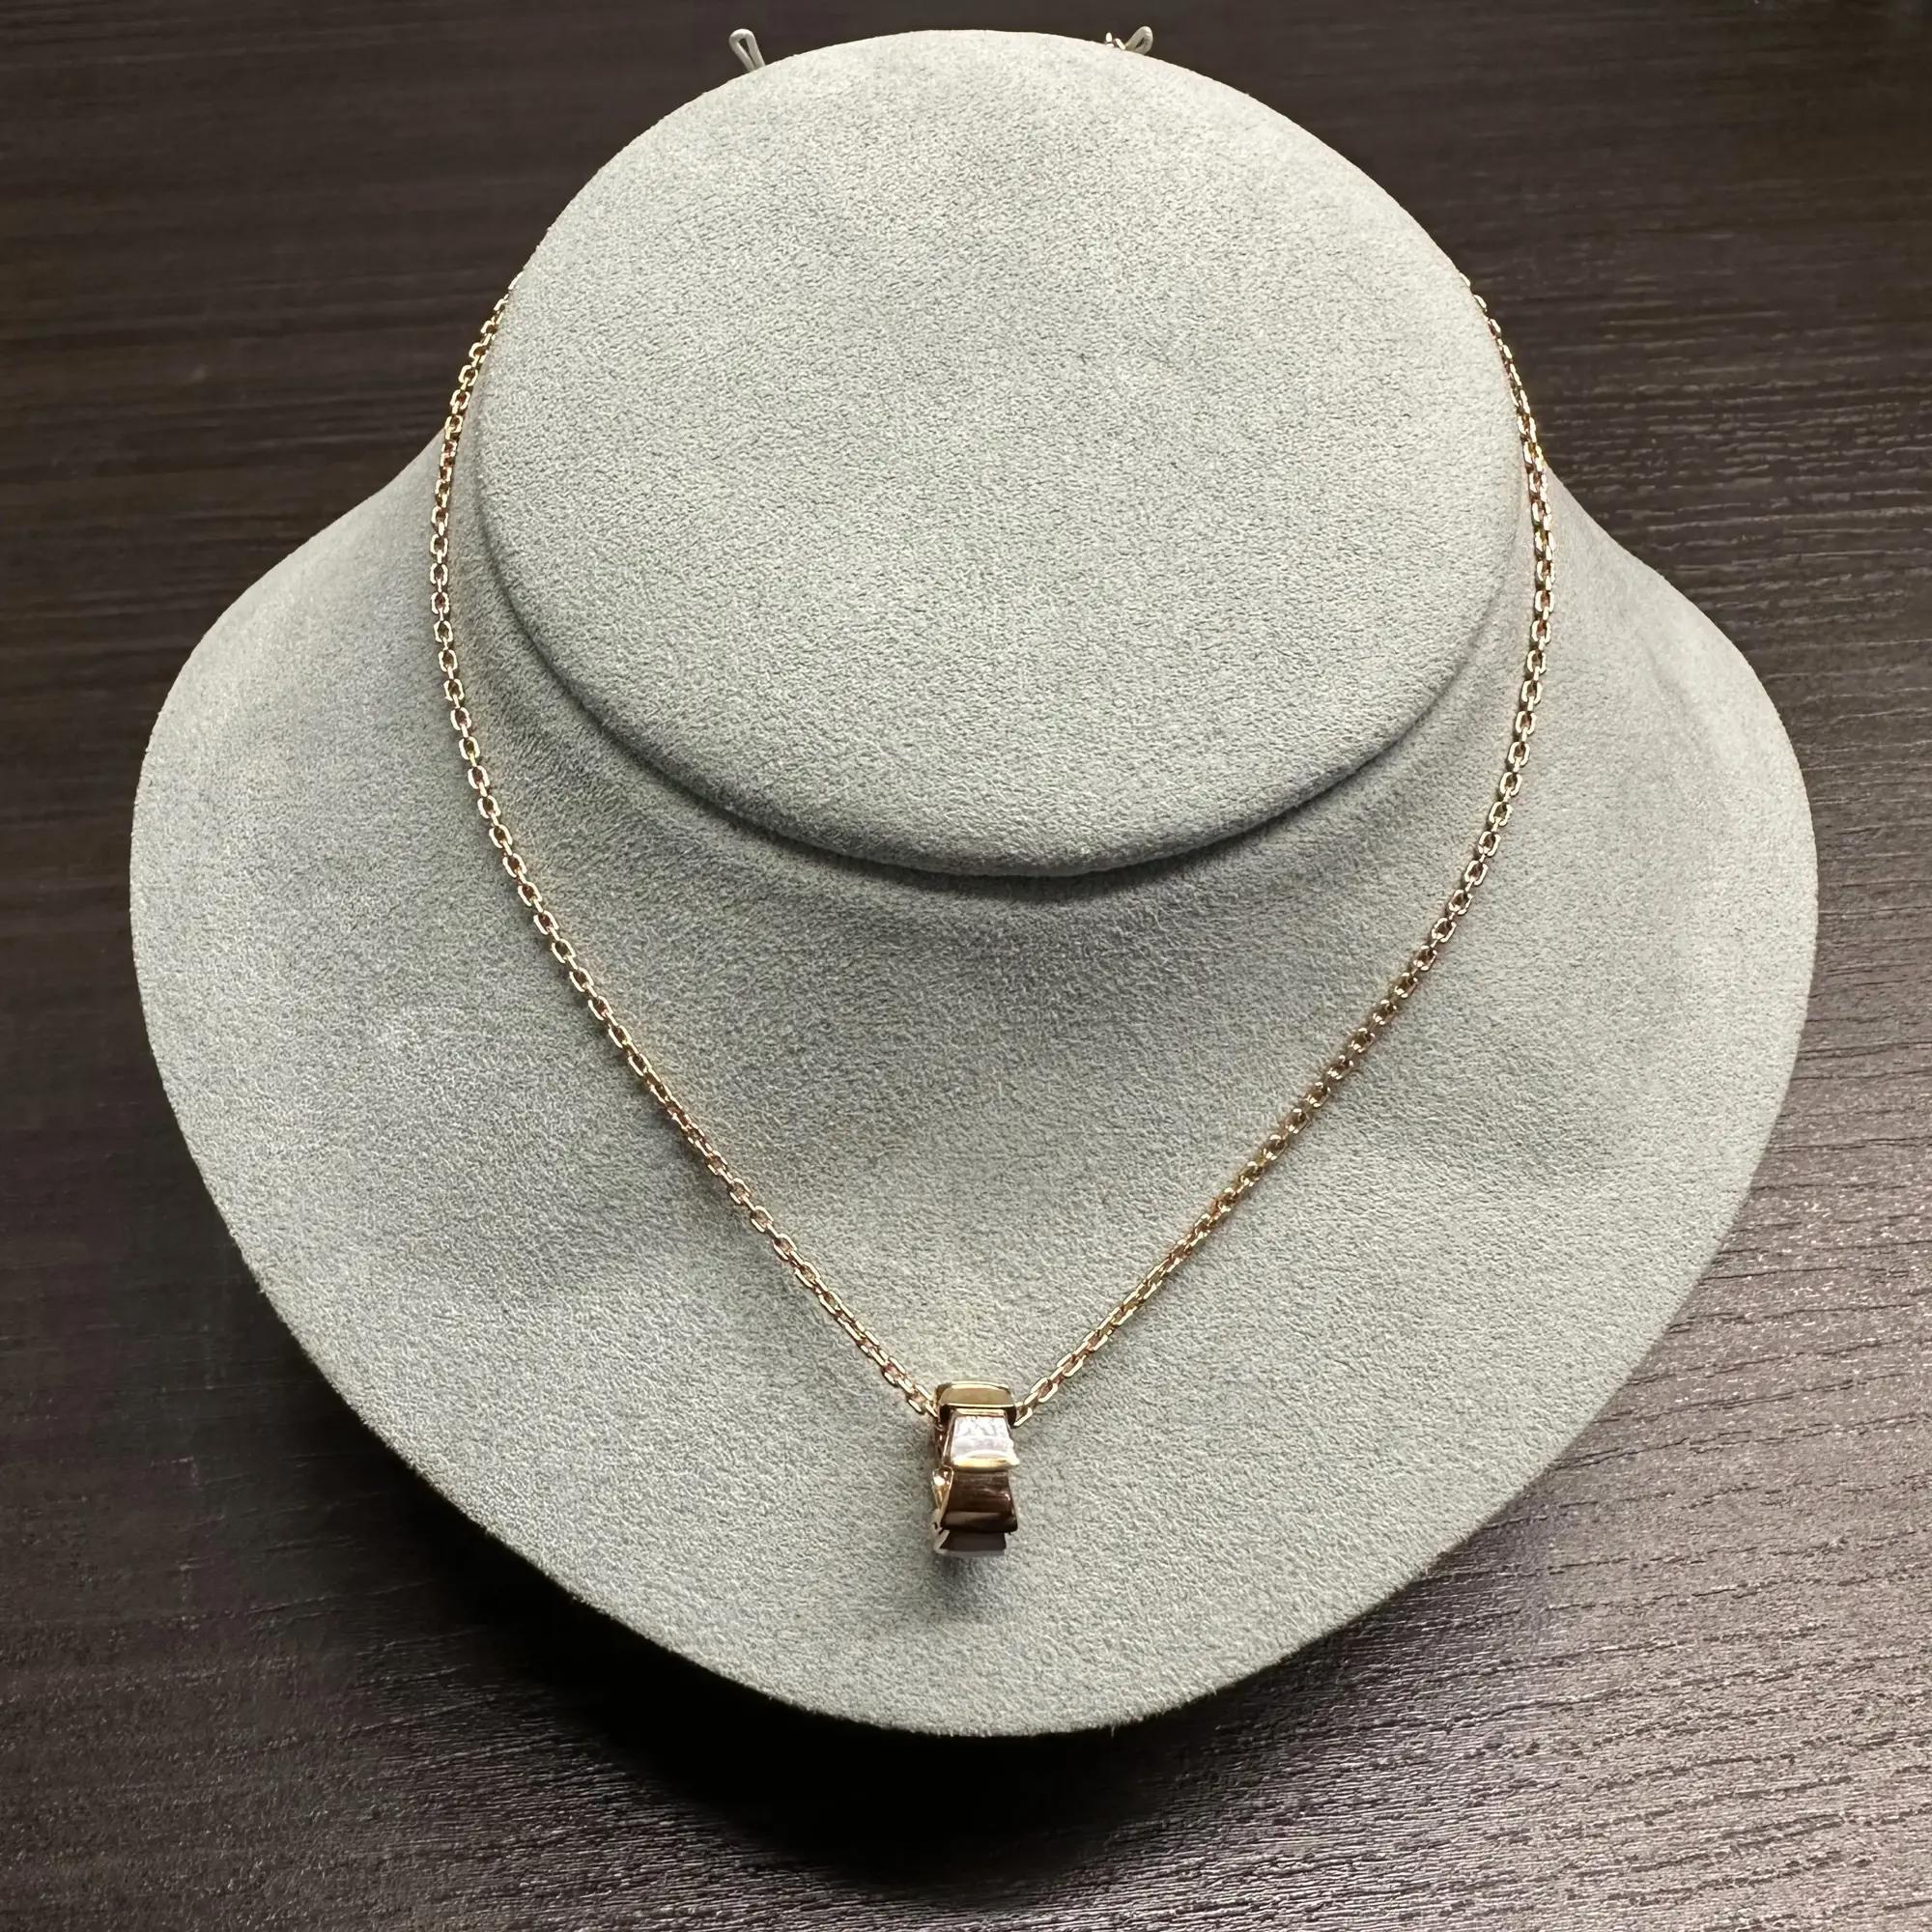 Bvlgari Serpenti Viper Mother Of Pearl Pendant Necklace 18K Rose Gold 17.5 In For Sale 1